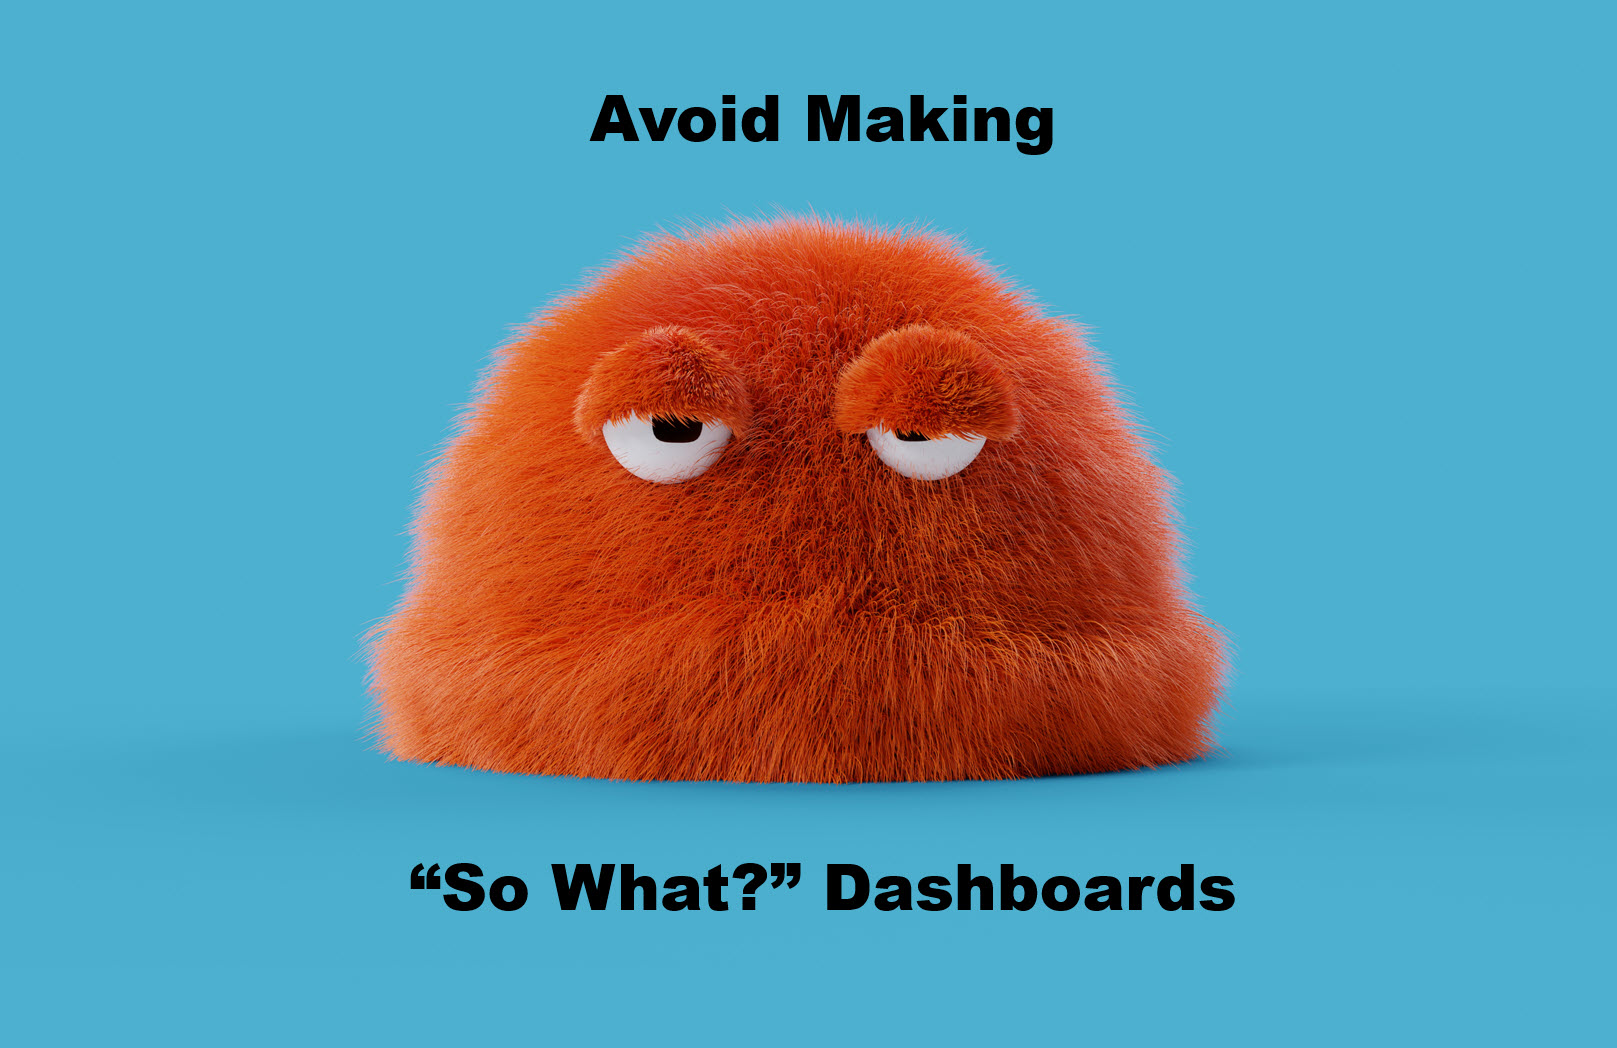 A cartoon character is annoyed because the dashboard is not useful